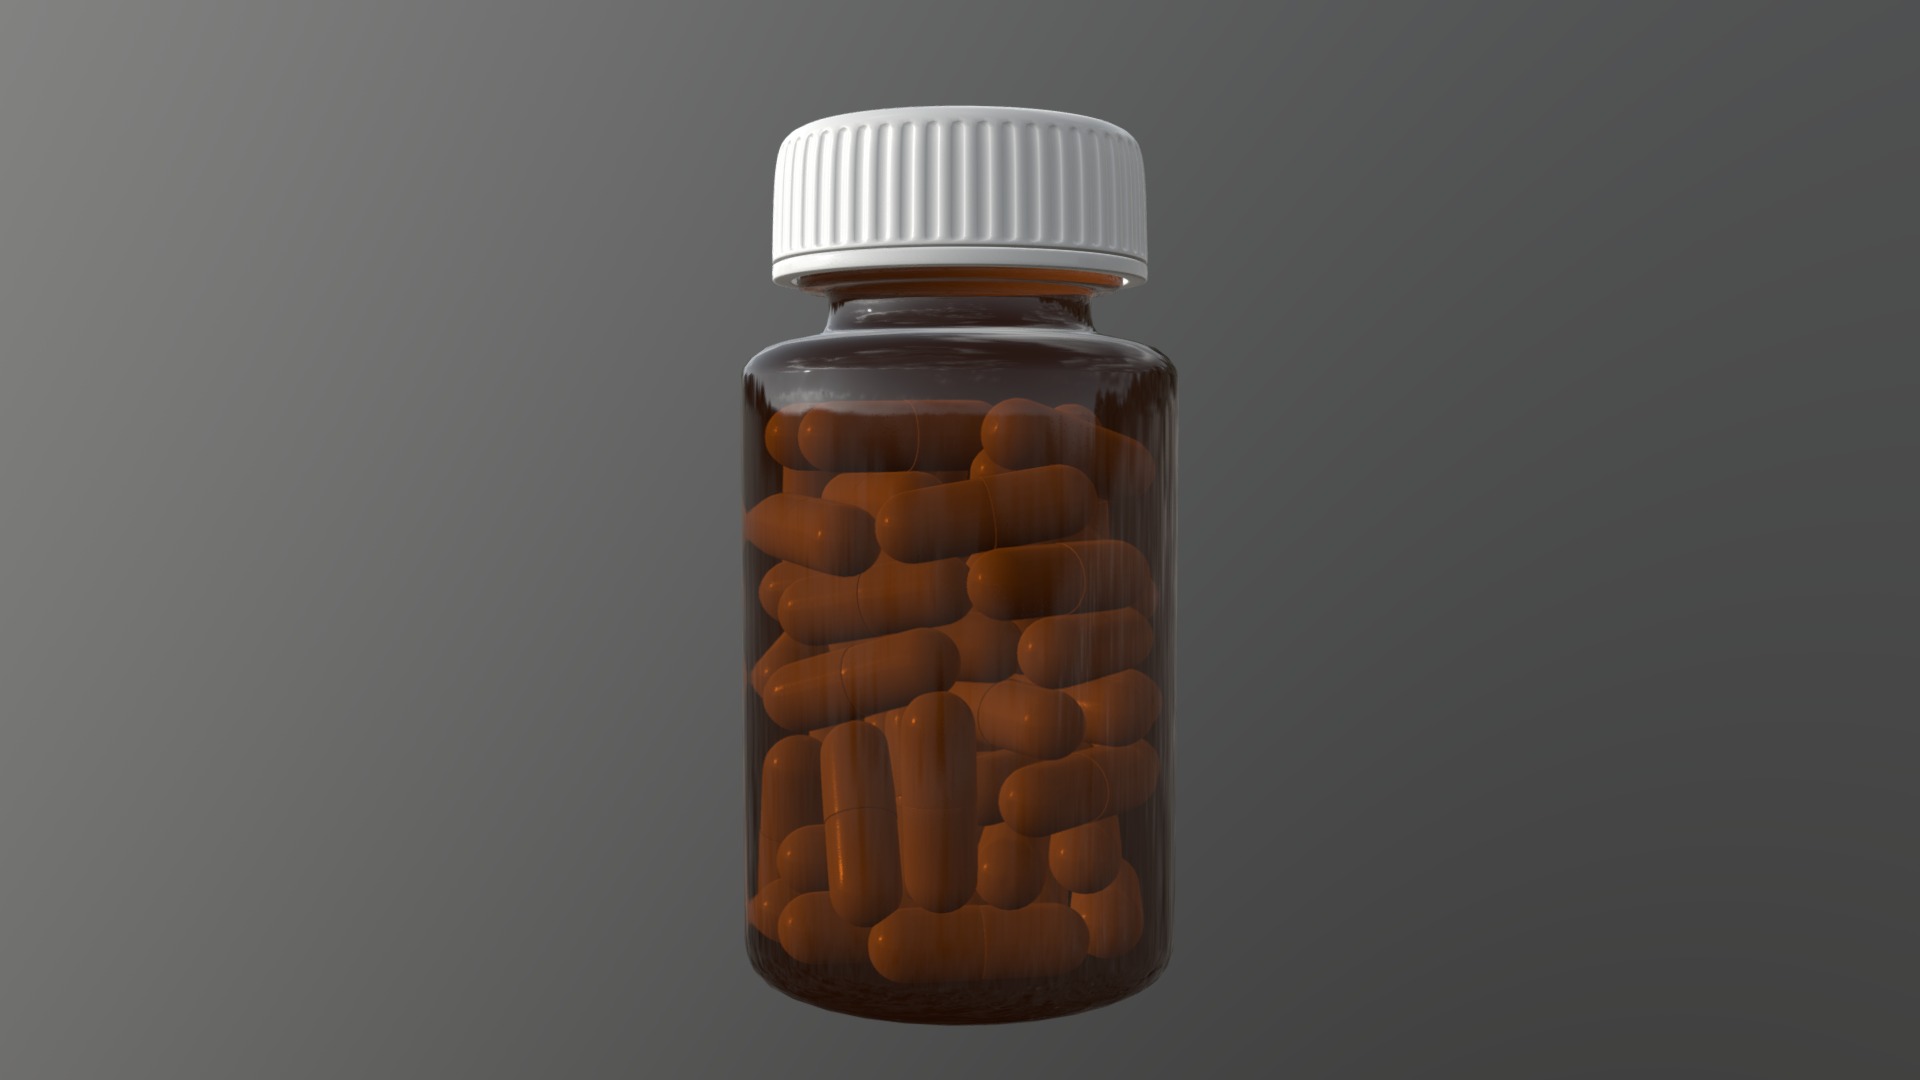 3D model pills in bottle 02 - This is a 3D model of the pills in bottle 02. The 3D model is about a jar of chocolate.